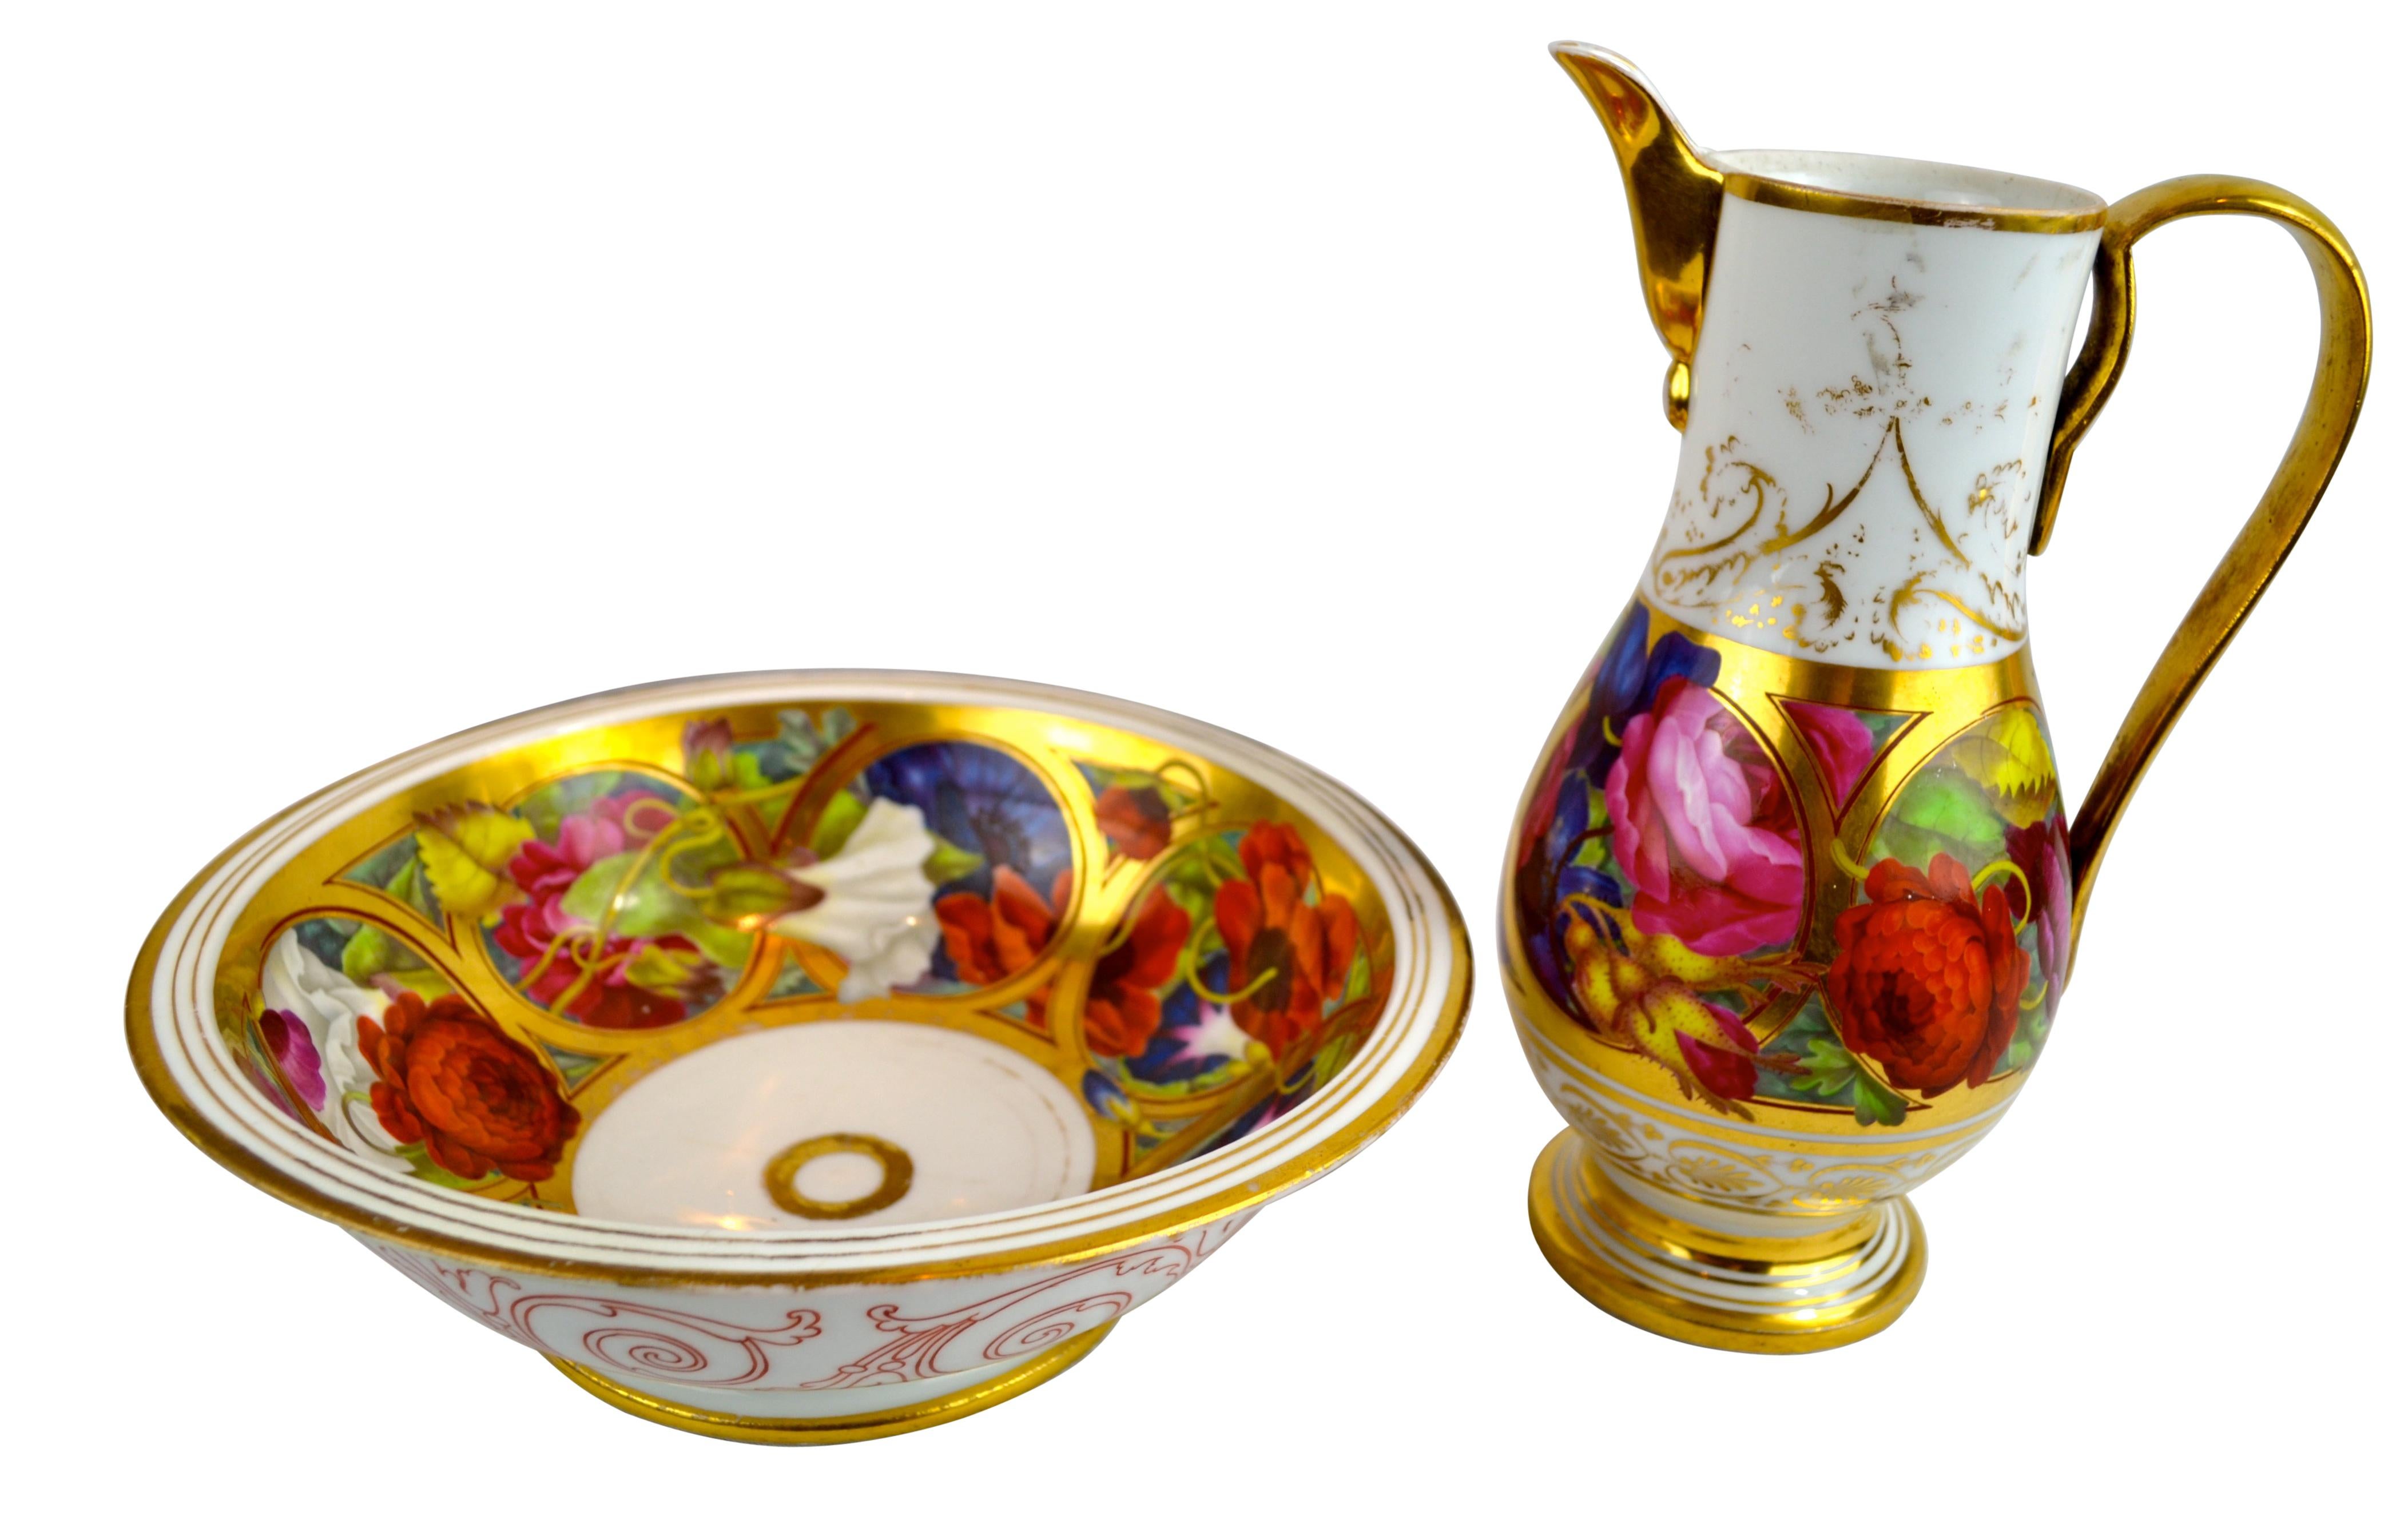 French Paris Porcelain Floral Ewer and Basin For Sale